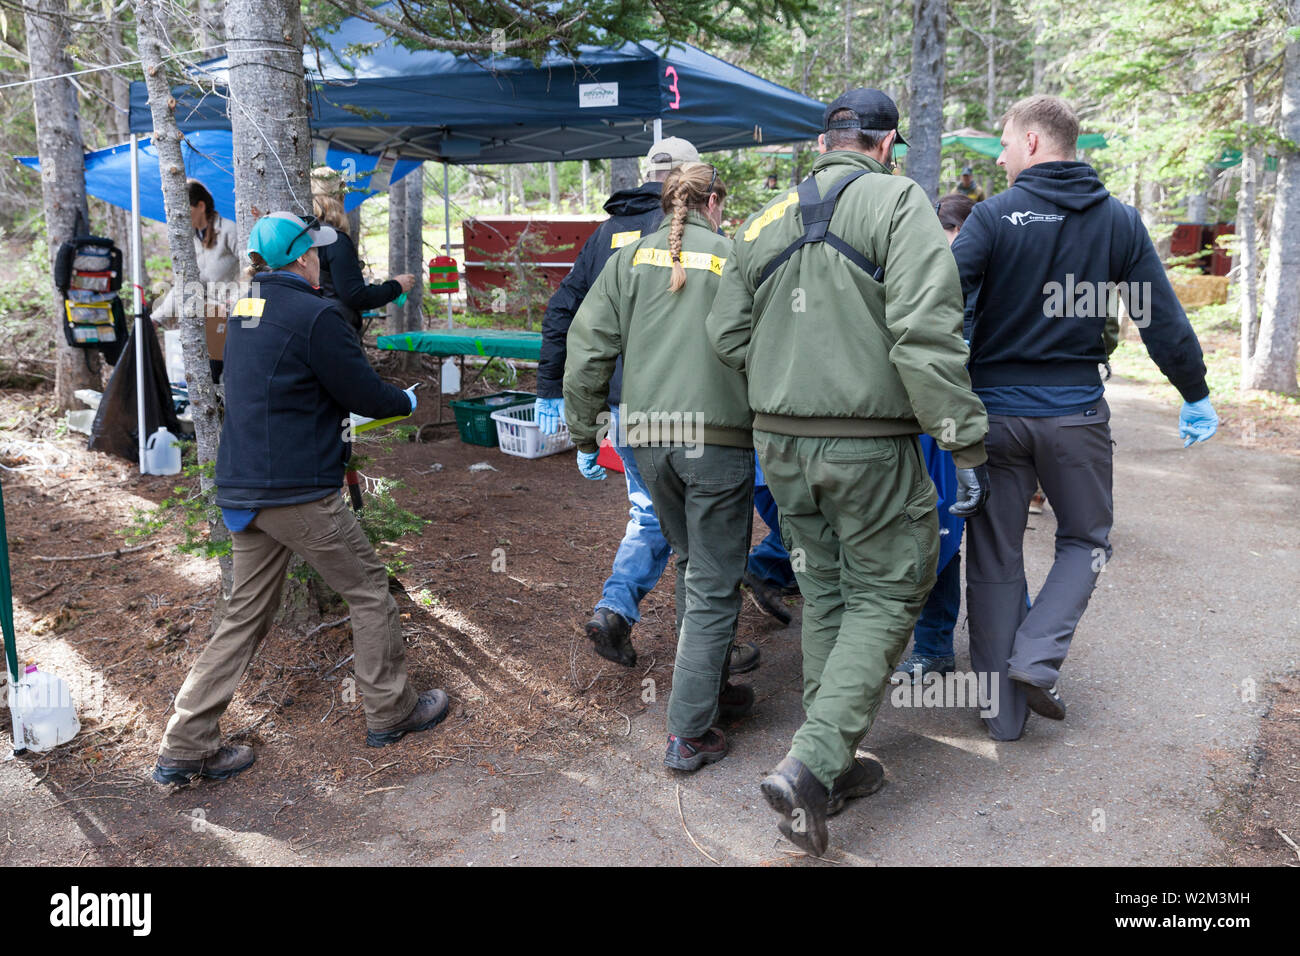 A team of rangers, employees and volunteers move a tranquilized mountain goat for crating at Hurricane Ridge in Olympic National Park, Washington on July 9, 2019. Today is the second day of a two-week long capture and translocation process moving mountain goats from Olympic National Park to the northern Cascade Mountains. The effort is a collaboration between the National Park Service, the Washington Department of Fish & Wildlife and the USDA Forest Service to re-establish depleted populations of mountain goats in the Northern Cascades while also removing non-native goats from the Olympic Moun Stock Photo